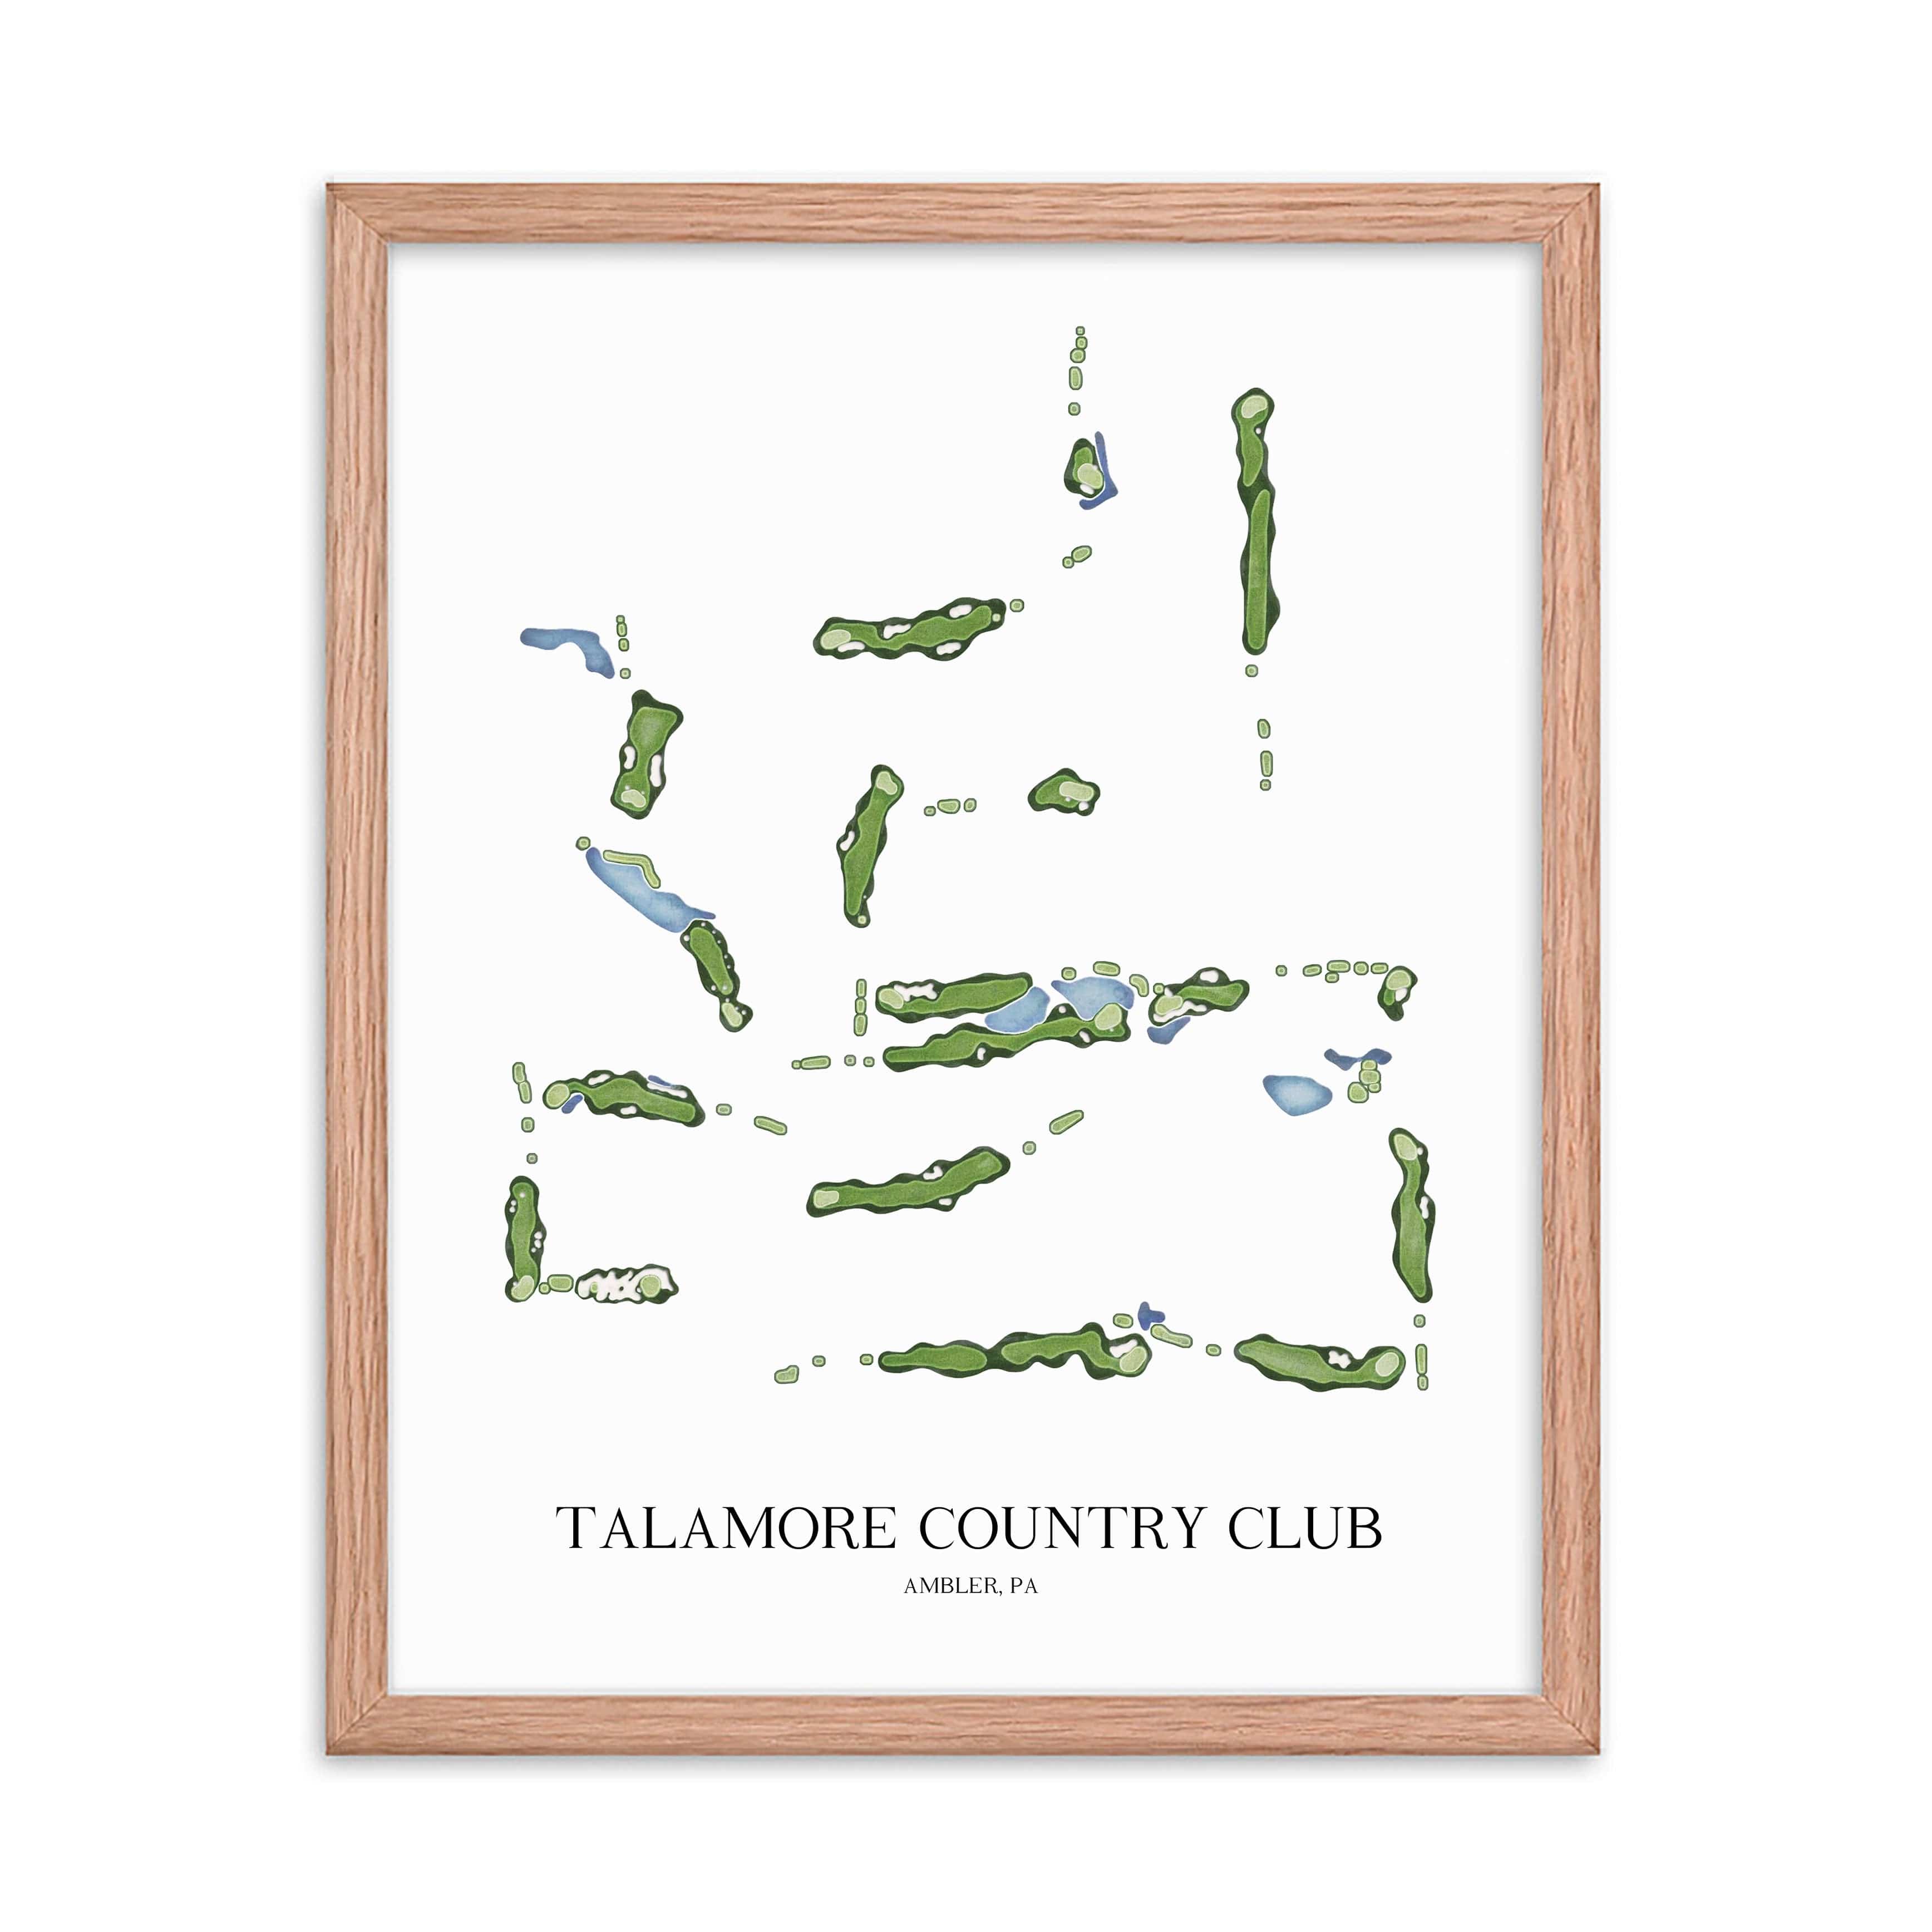 The 19th Hole Golf Shop - Golf Course Prints -  Talamore Country Club Golf Course Map